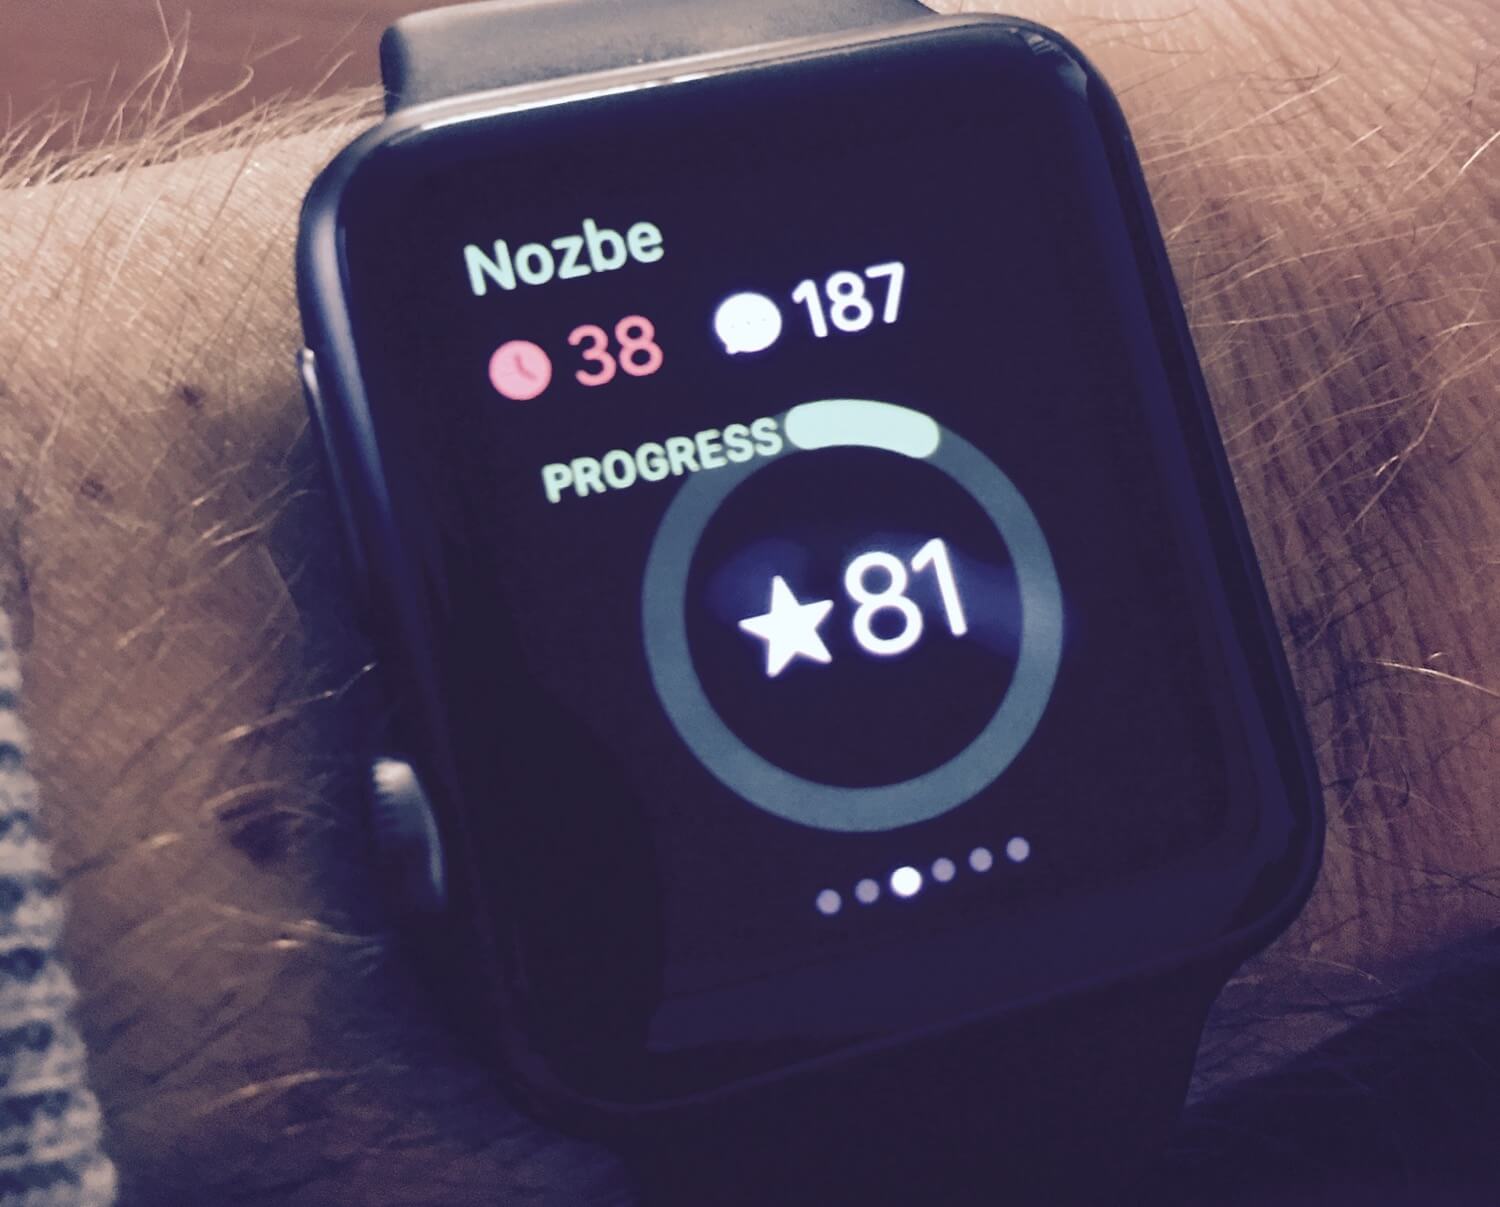 3 Things I love about the Apple Watch: communication, fitness & dashboard